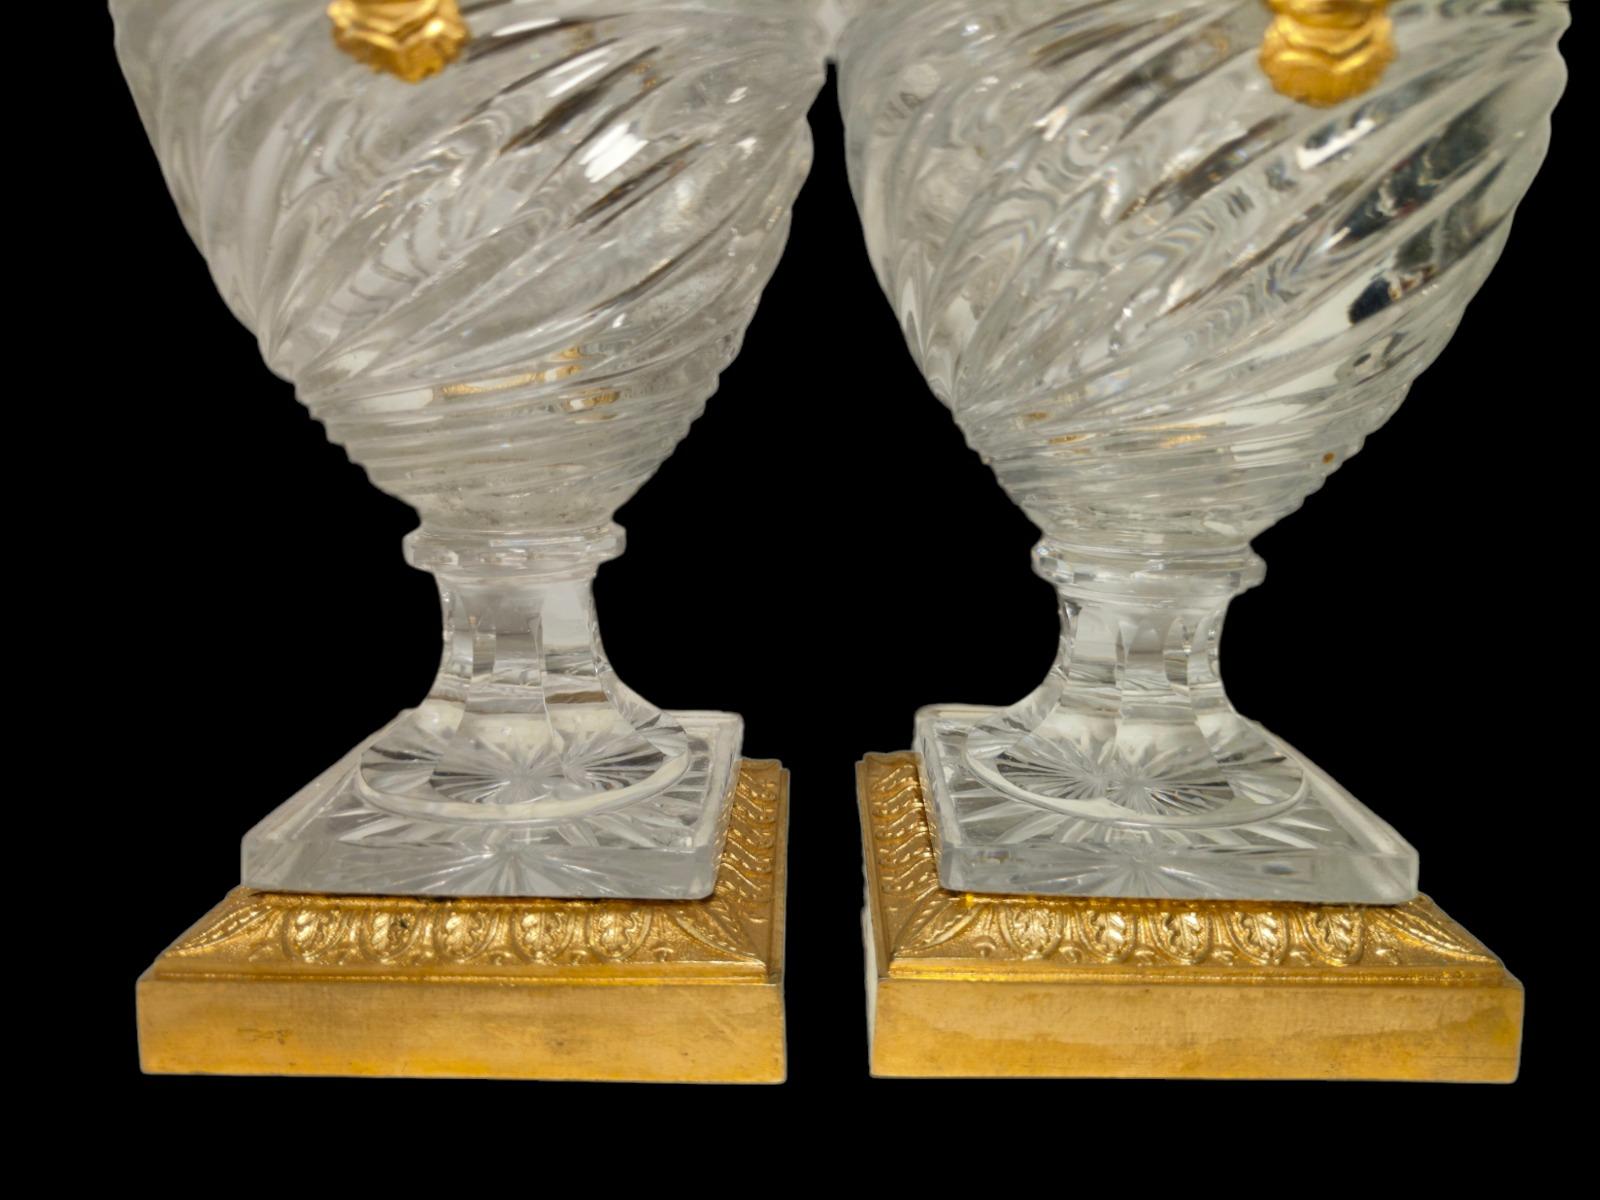 A PAIR OF RUSSIAN BRONZE CUT CRYSTAL VASES. 19TH C
A PAIR OF 19th C. RUSSIAN ORMOLU-MOUNTED (Bronze) CUT CRYSTAL VASES. H 33 cm